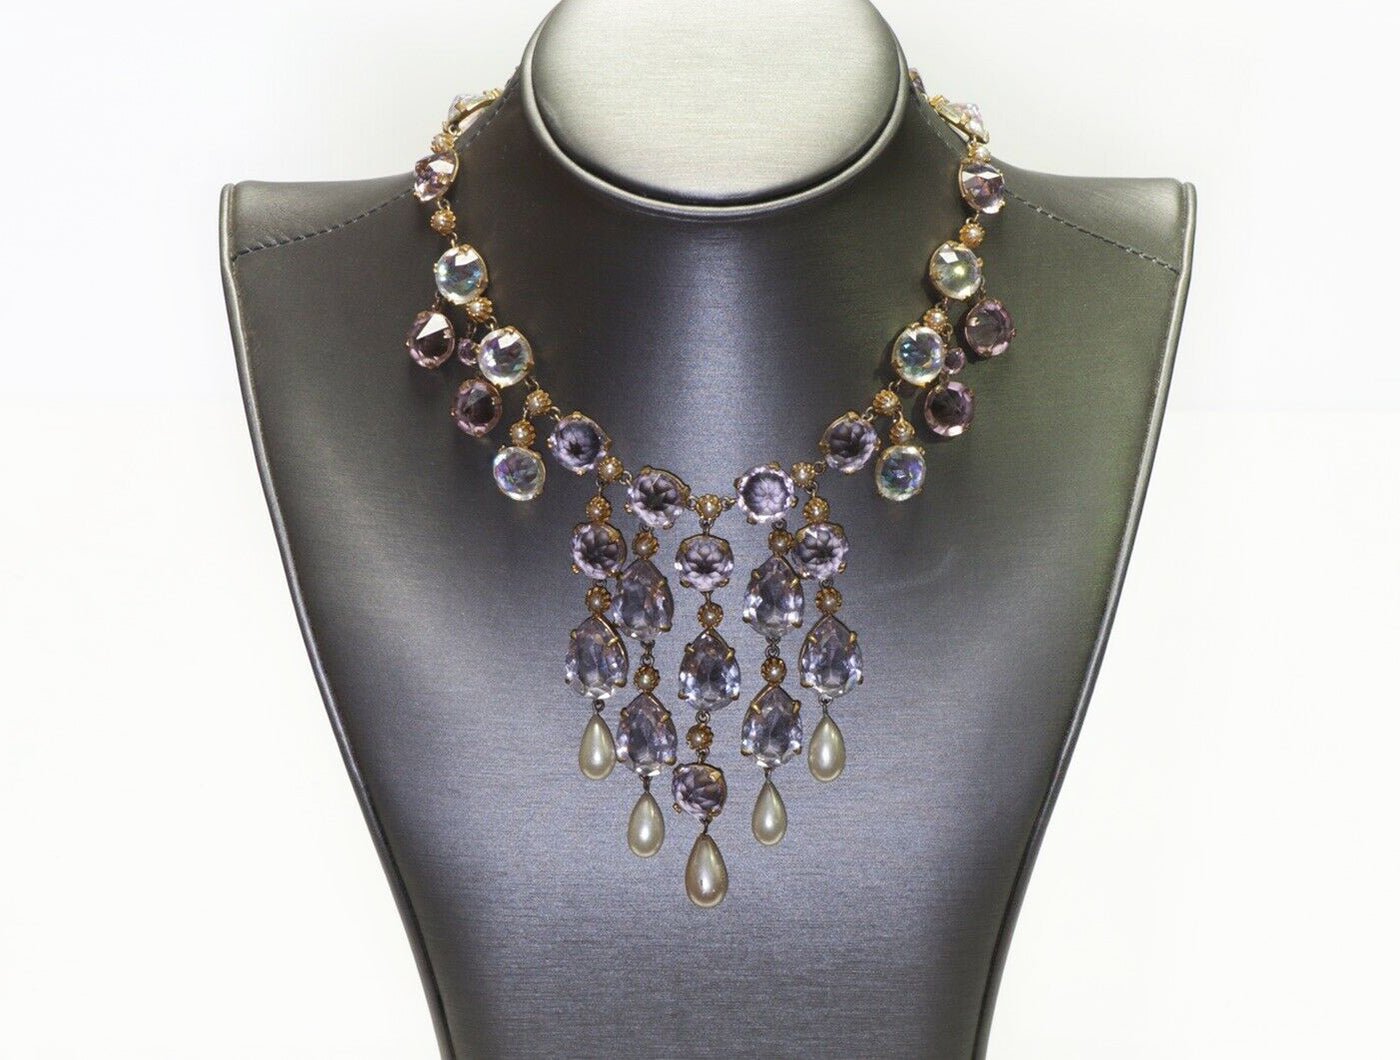 Christian Dior 1950’s by Yves Saint Laurent Purple Crystal Pearl Collar Necklace - DSF Antique Jewelry